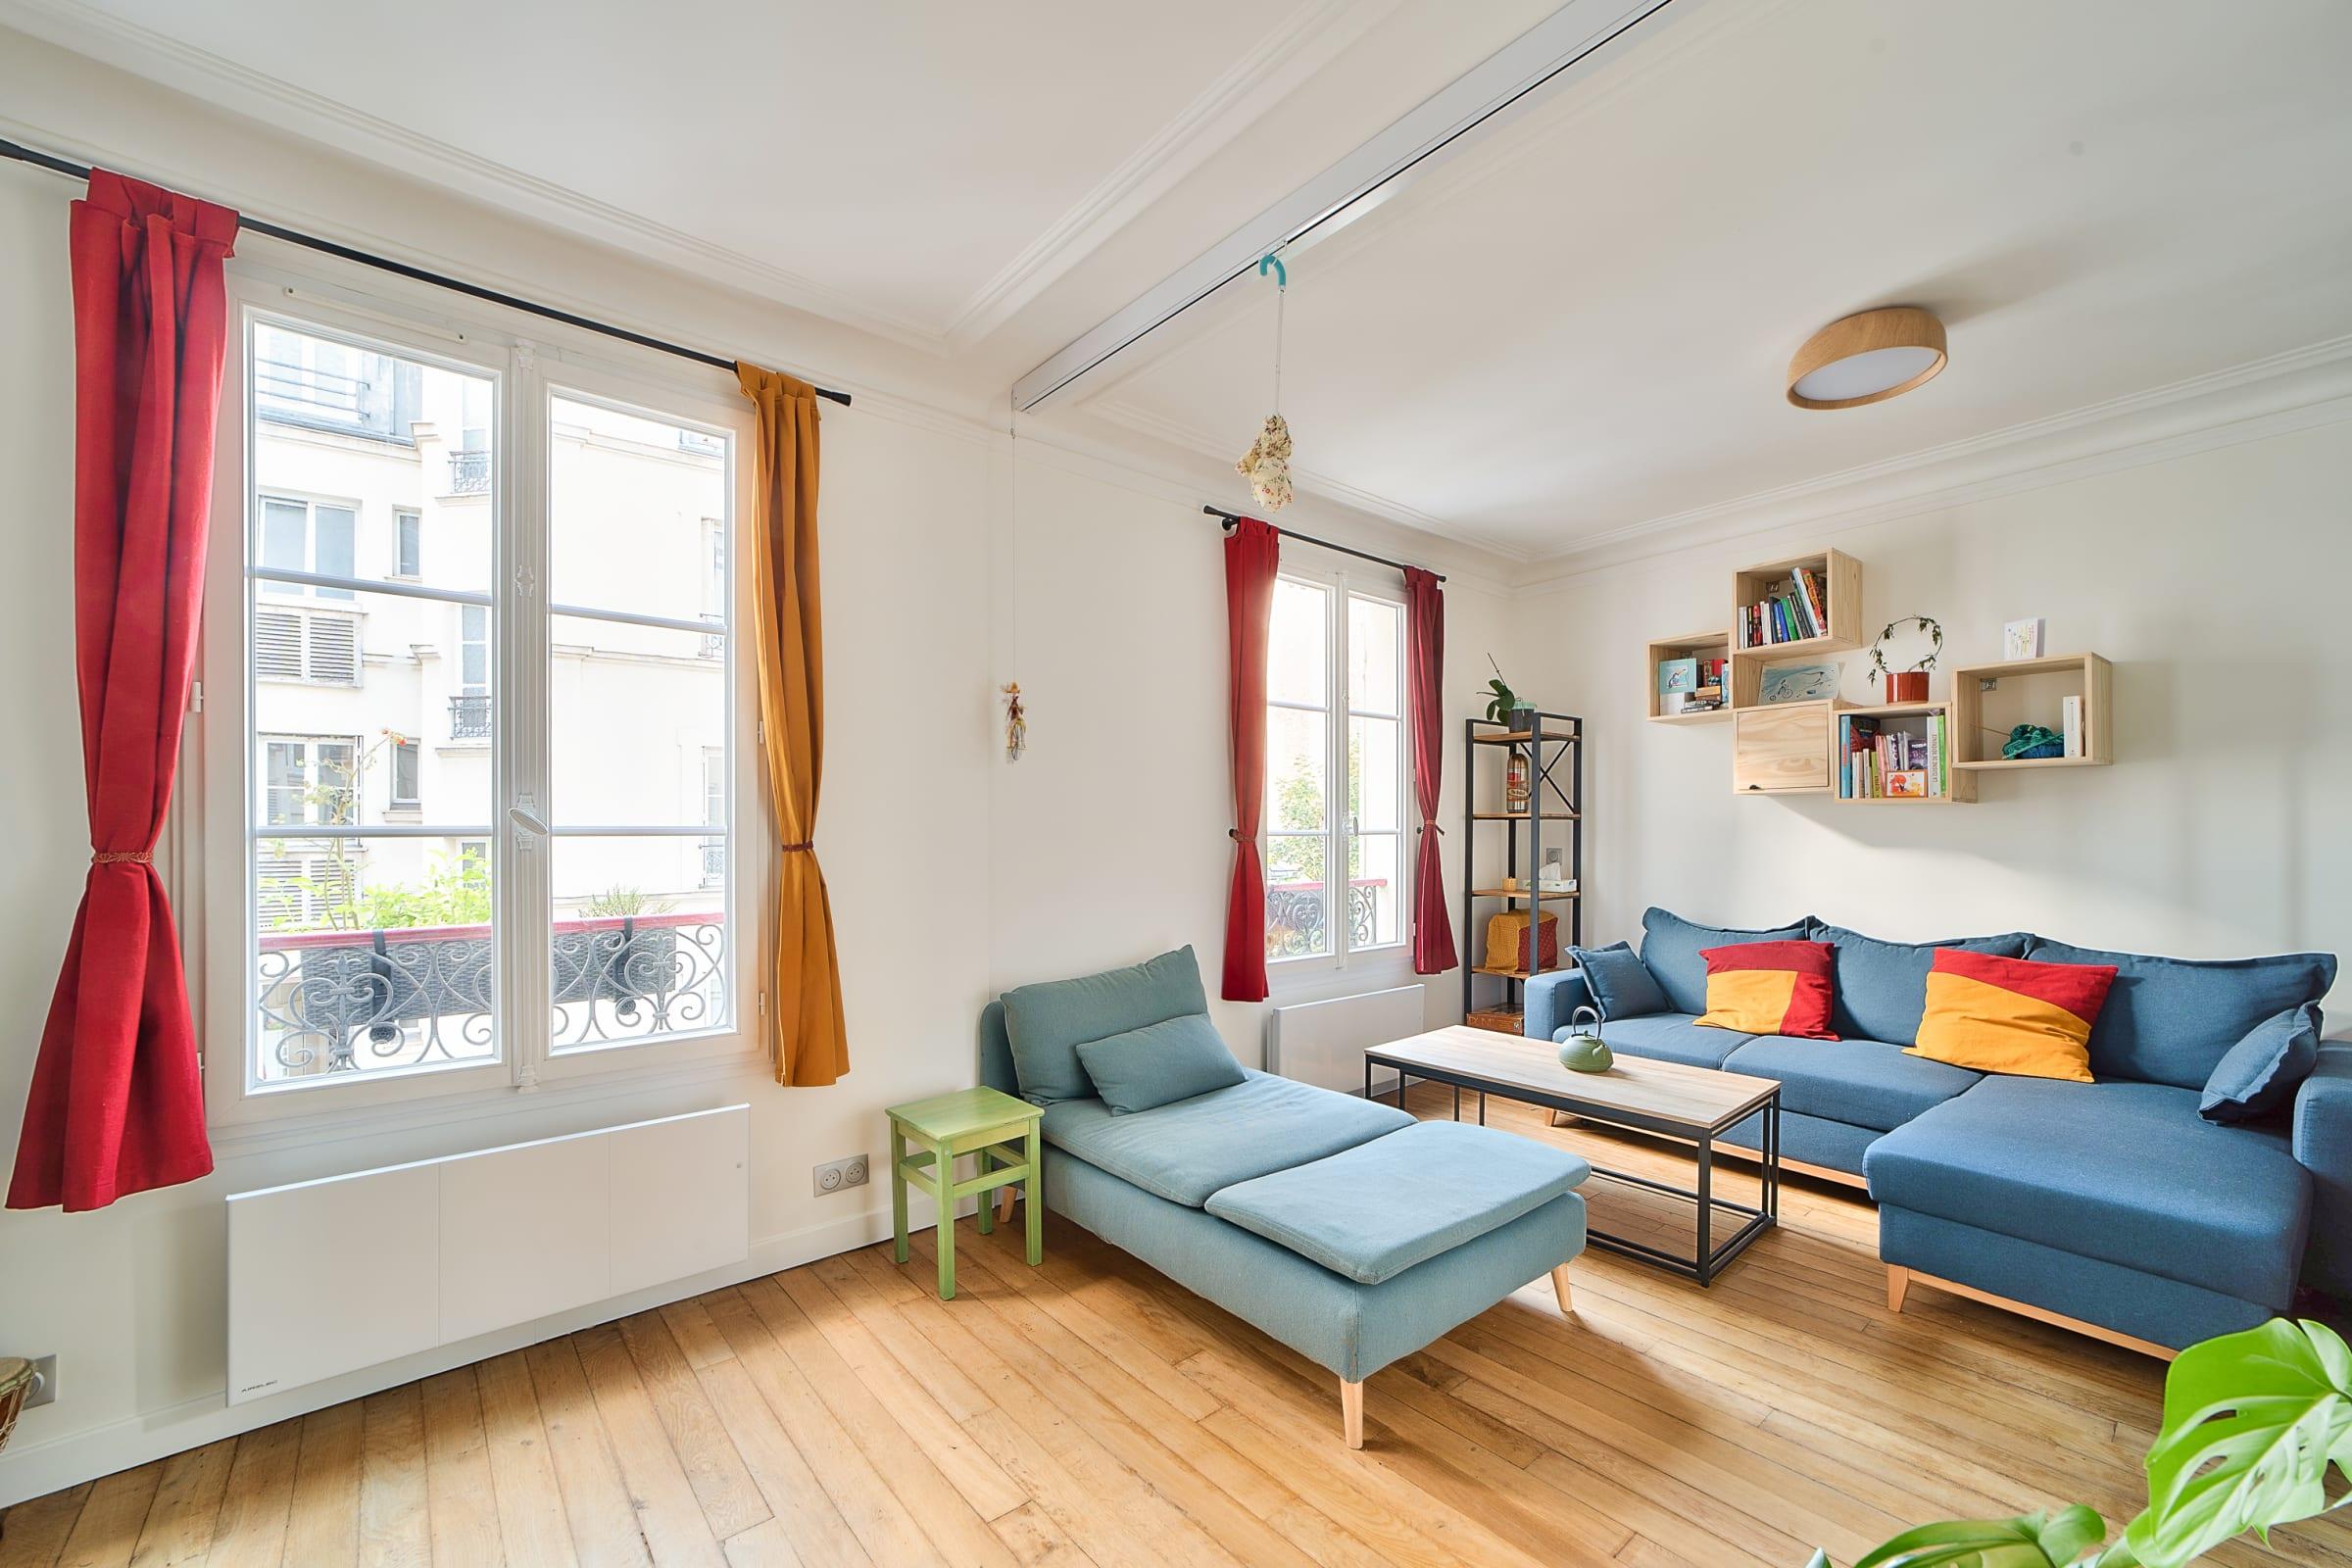 Property Image 2 - Comfortable apartment in the heart of Paris